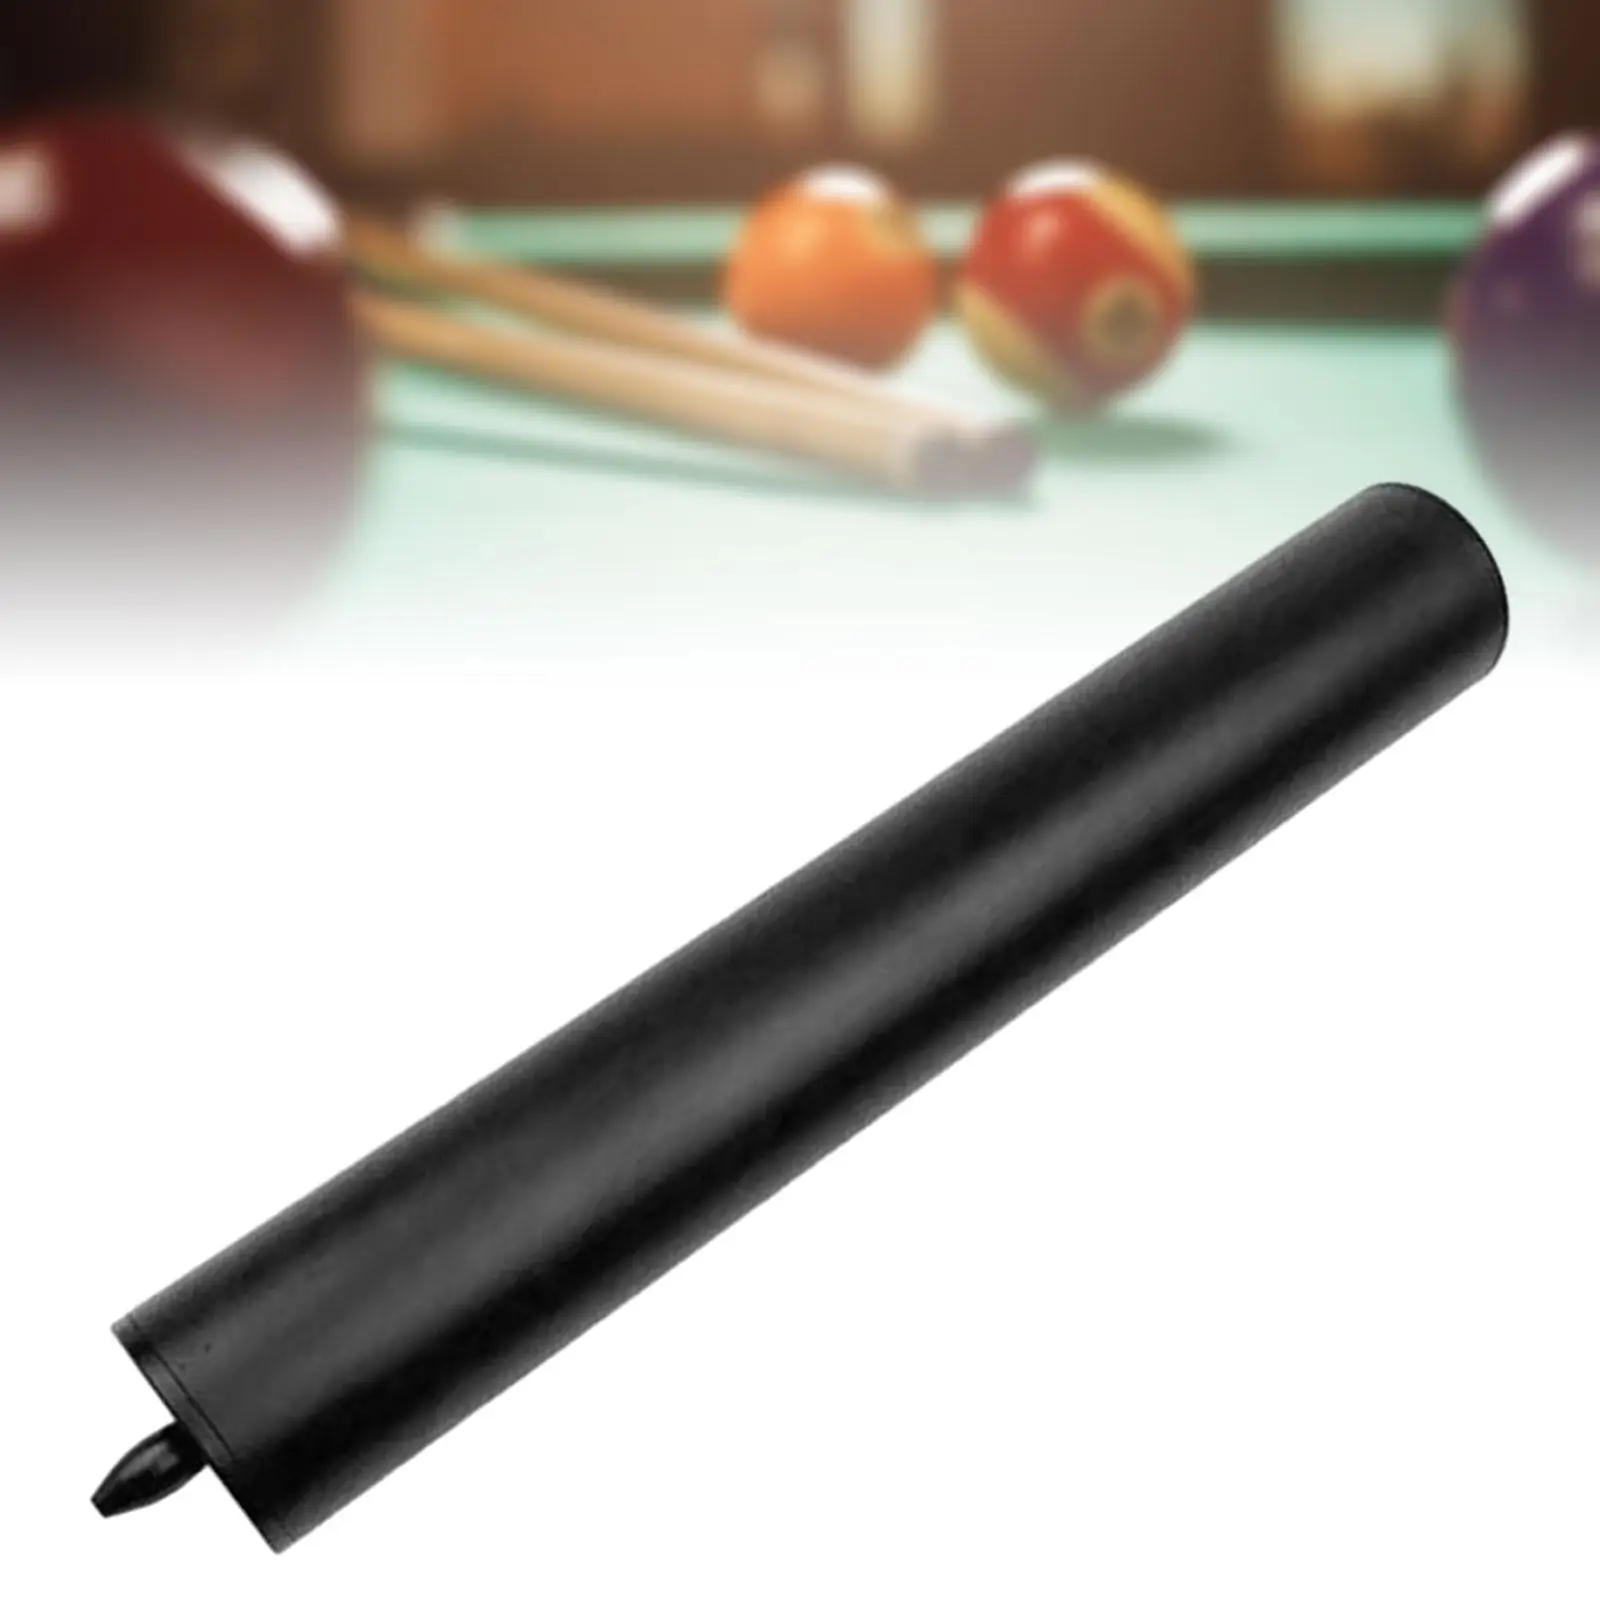 Pool Cue Extender Portable Professional Lightweight Billiards Cue Extension for Billiard Cues Beginners Athlete Enthusiast Parts